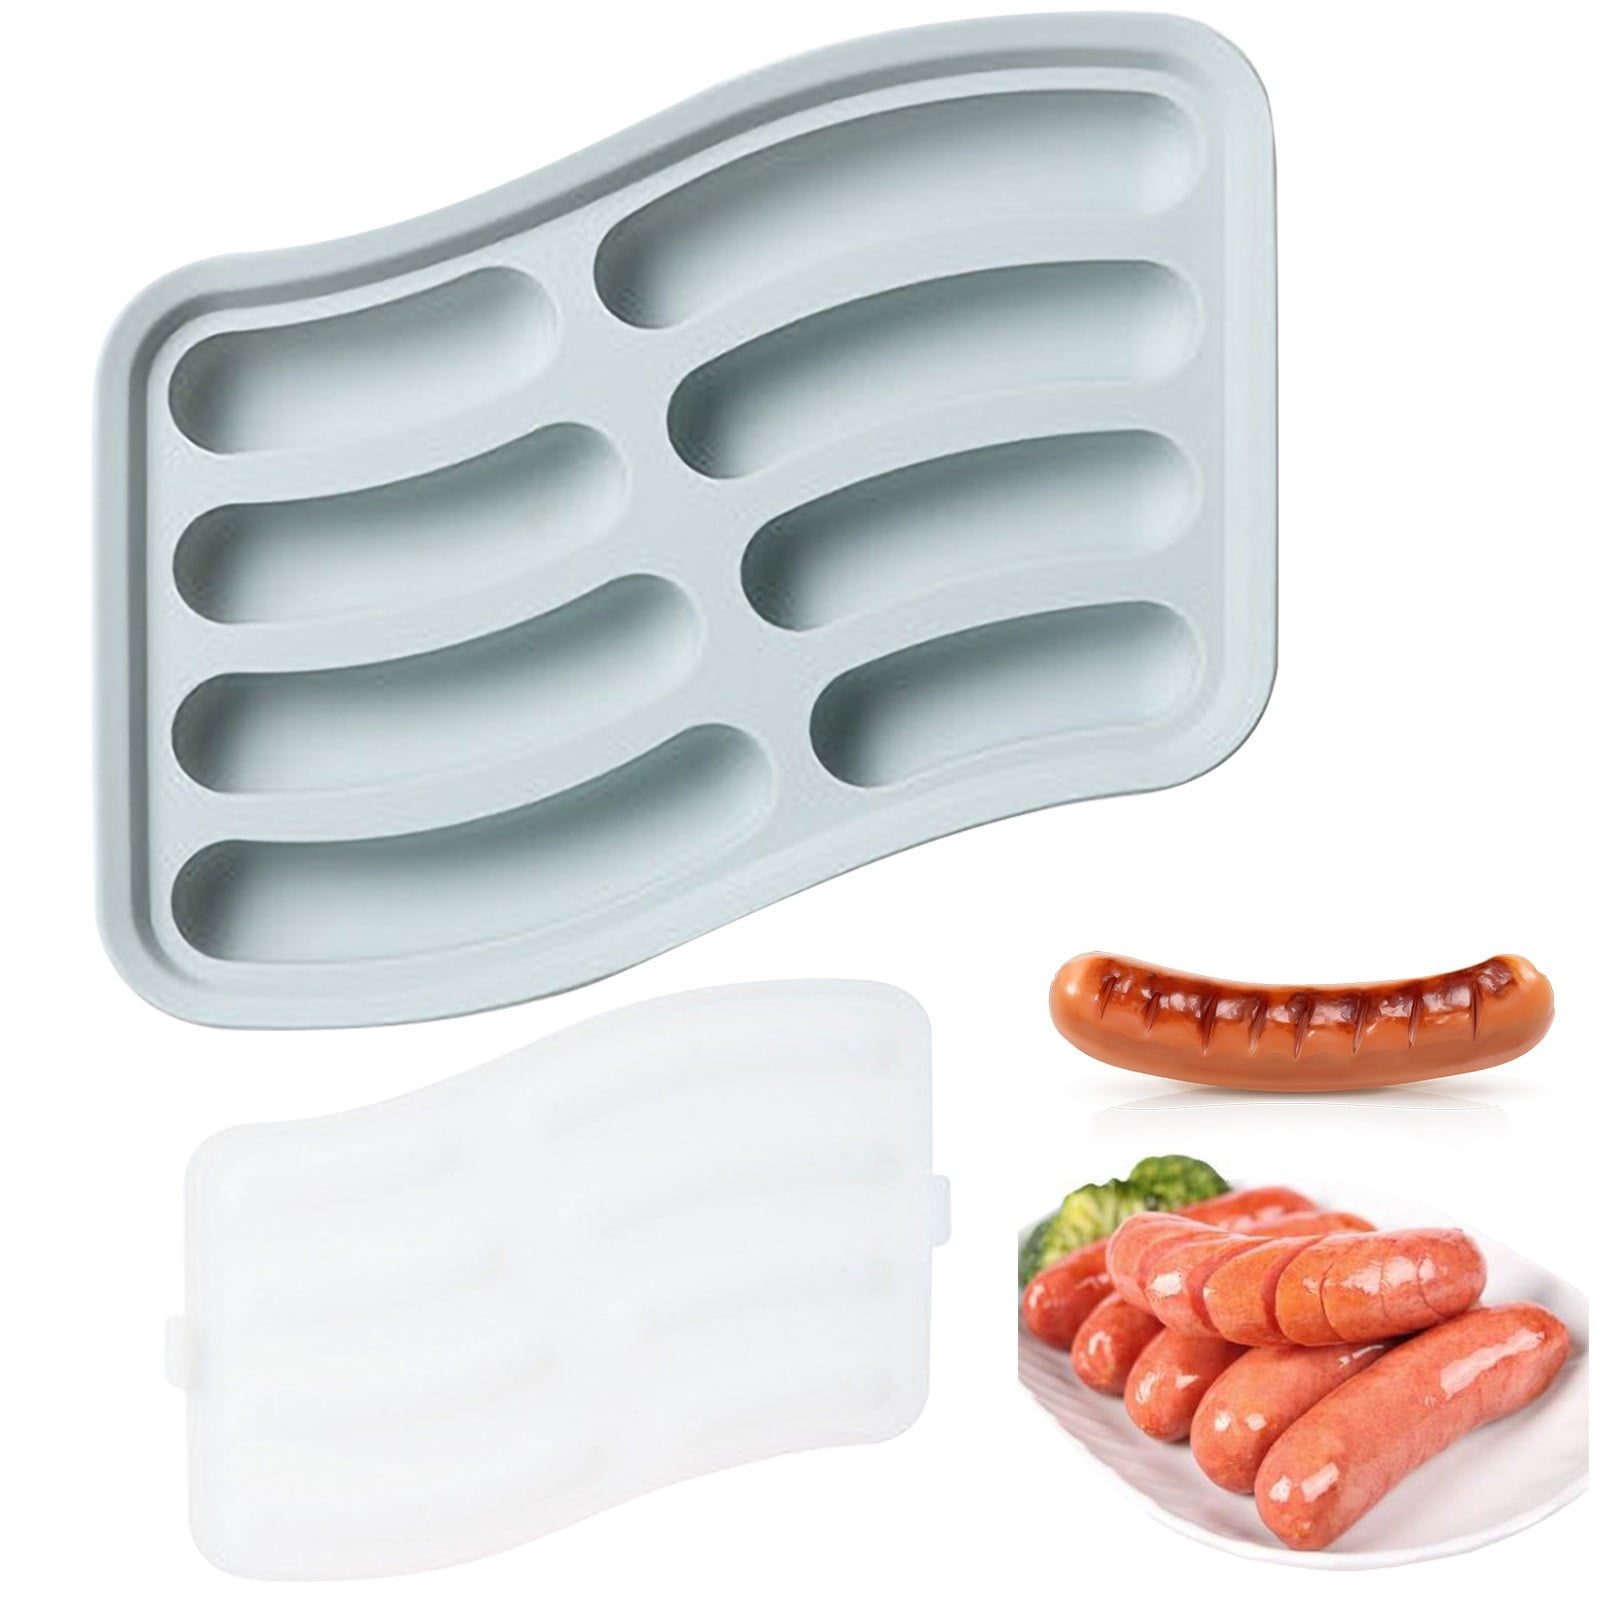 Details about   Children's Silicone Hot Dog Ham Mold Self-made DIY Mold for Egg Sausage 